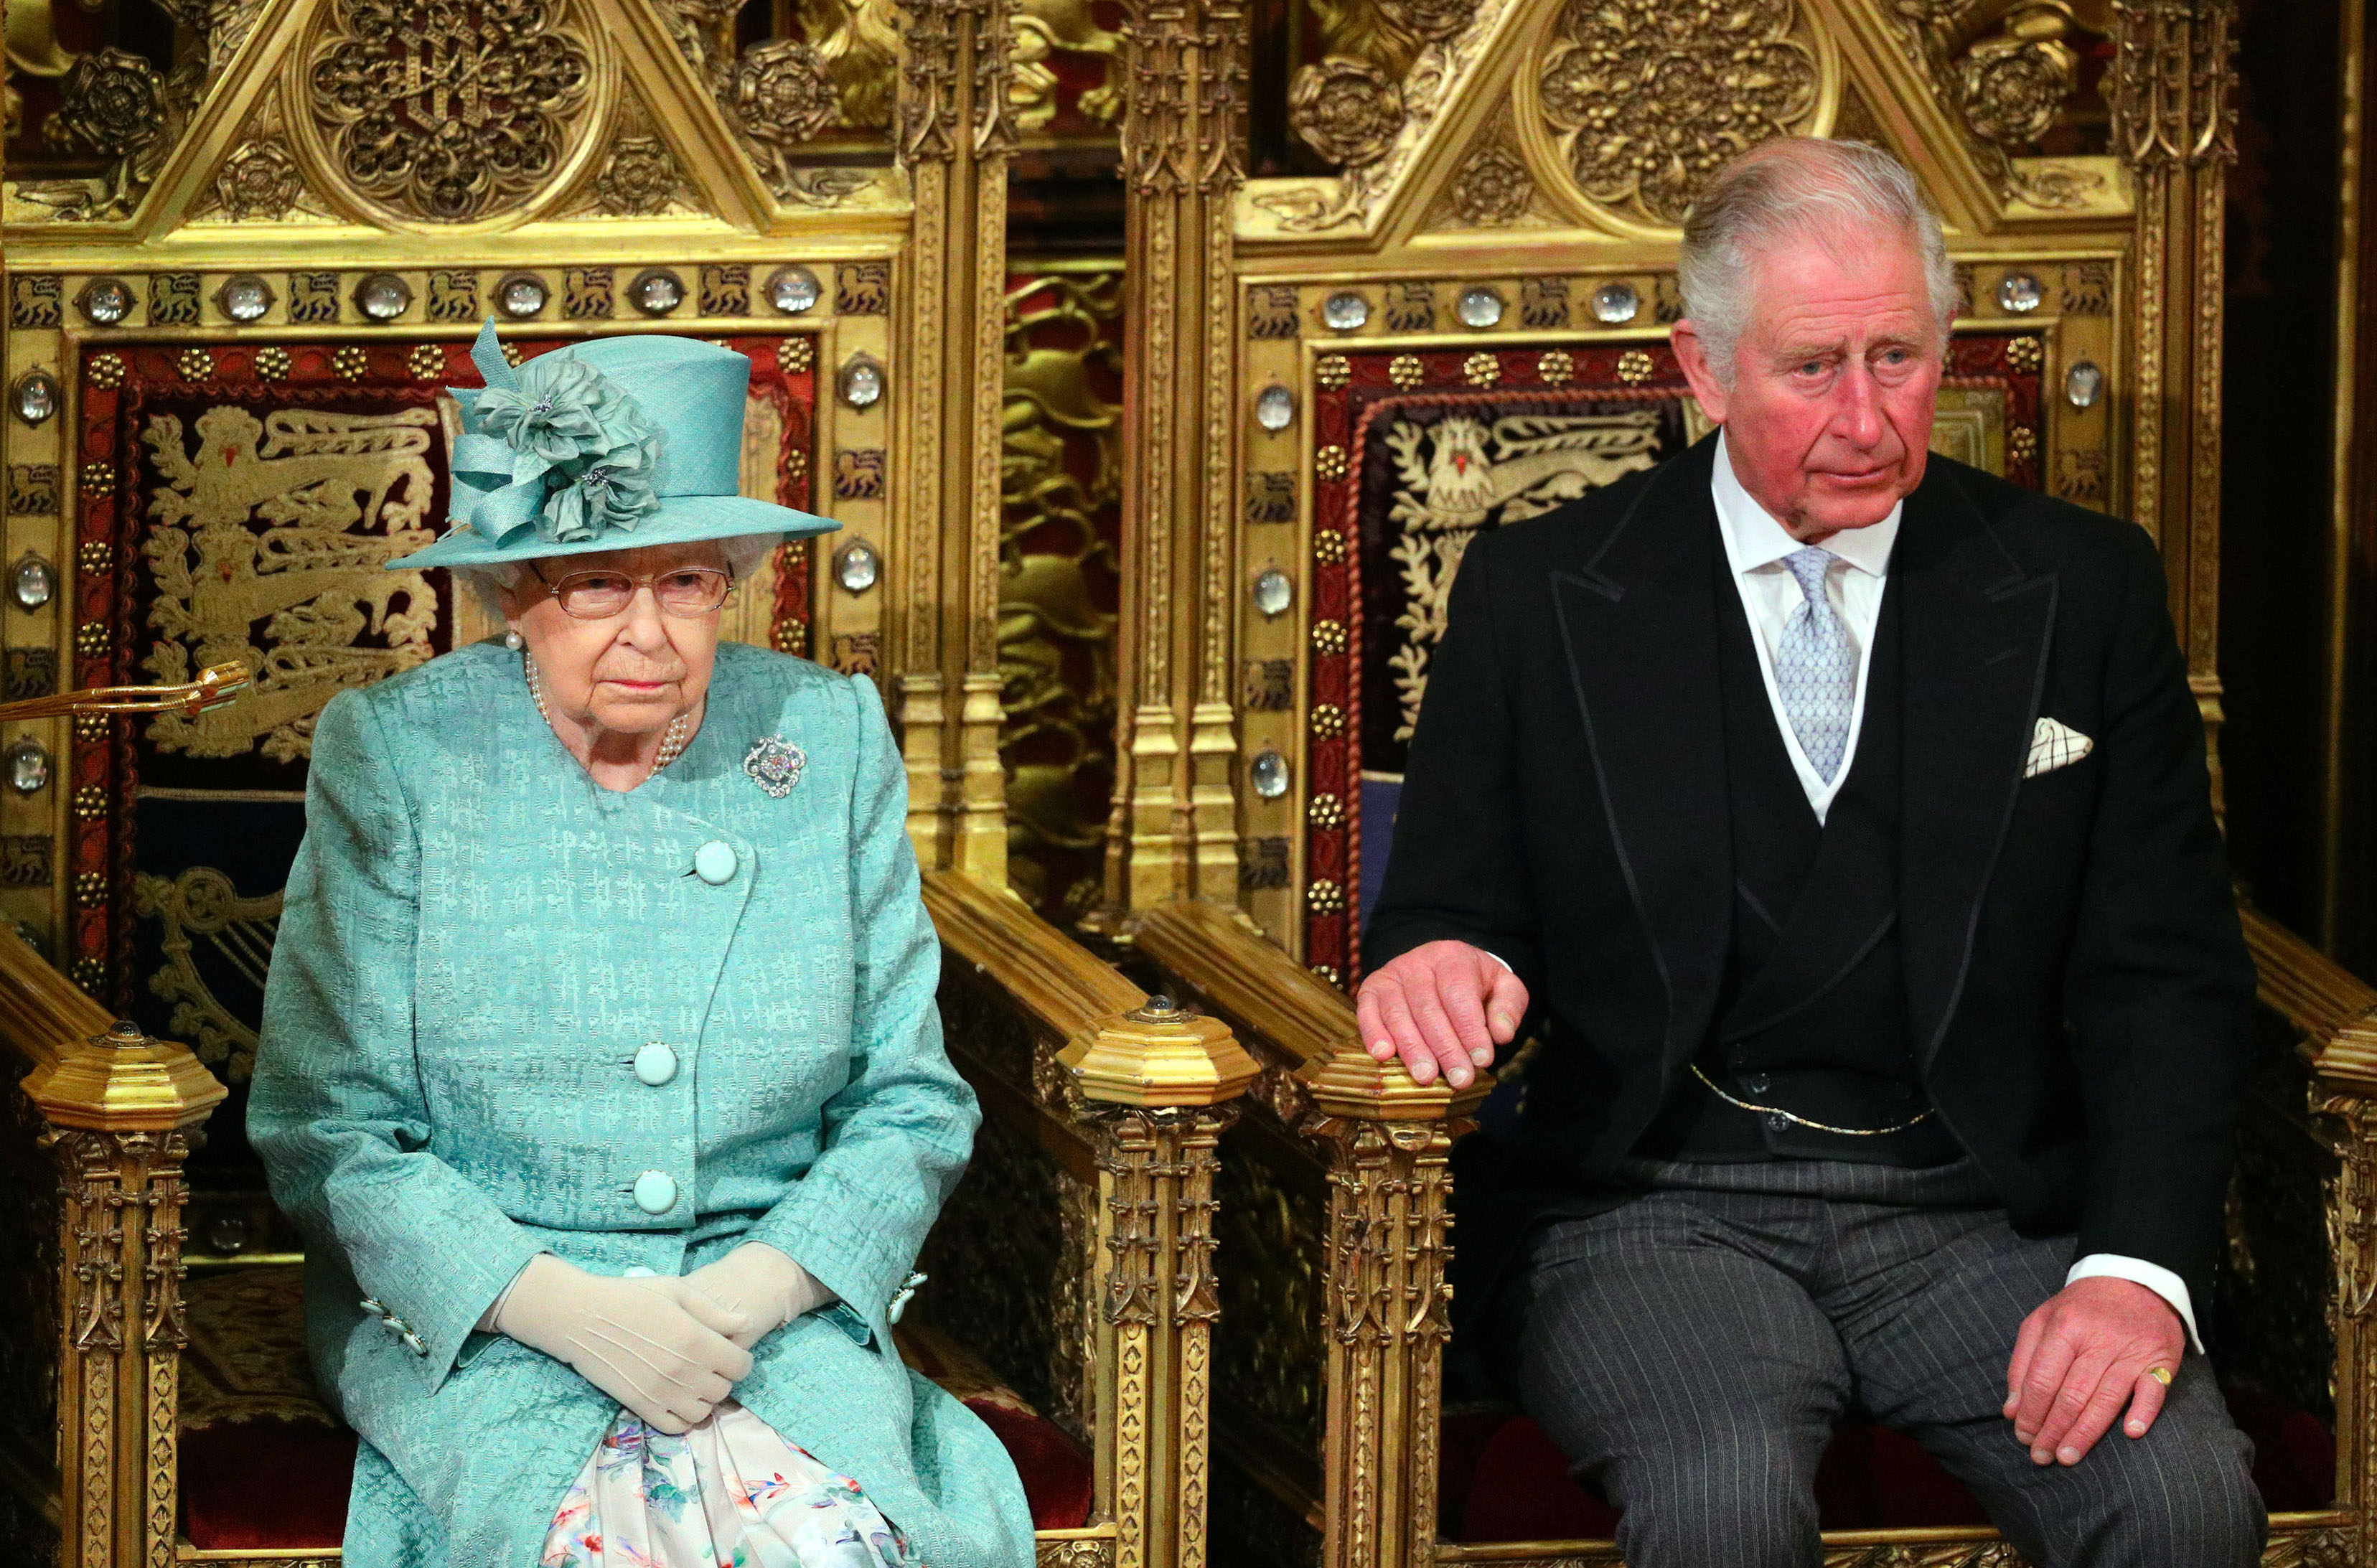 Queen Elizabeth II and Prince Charles seated next to each other for the state opening of parliament in 2019